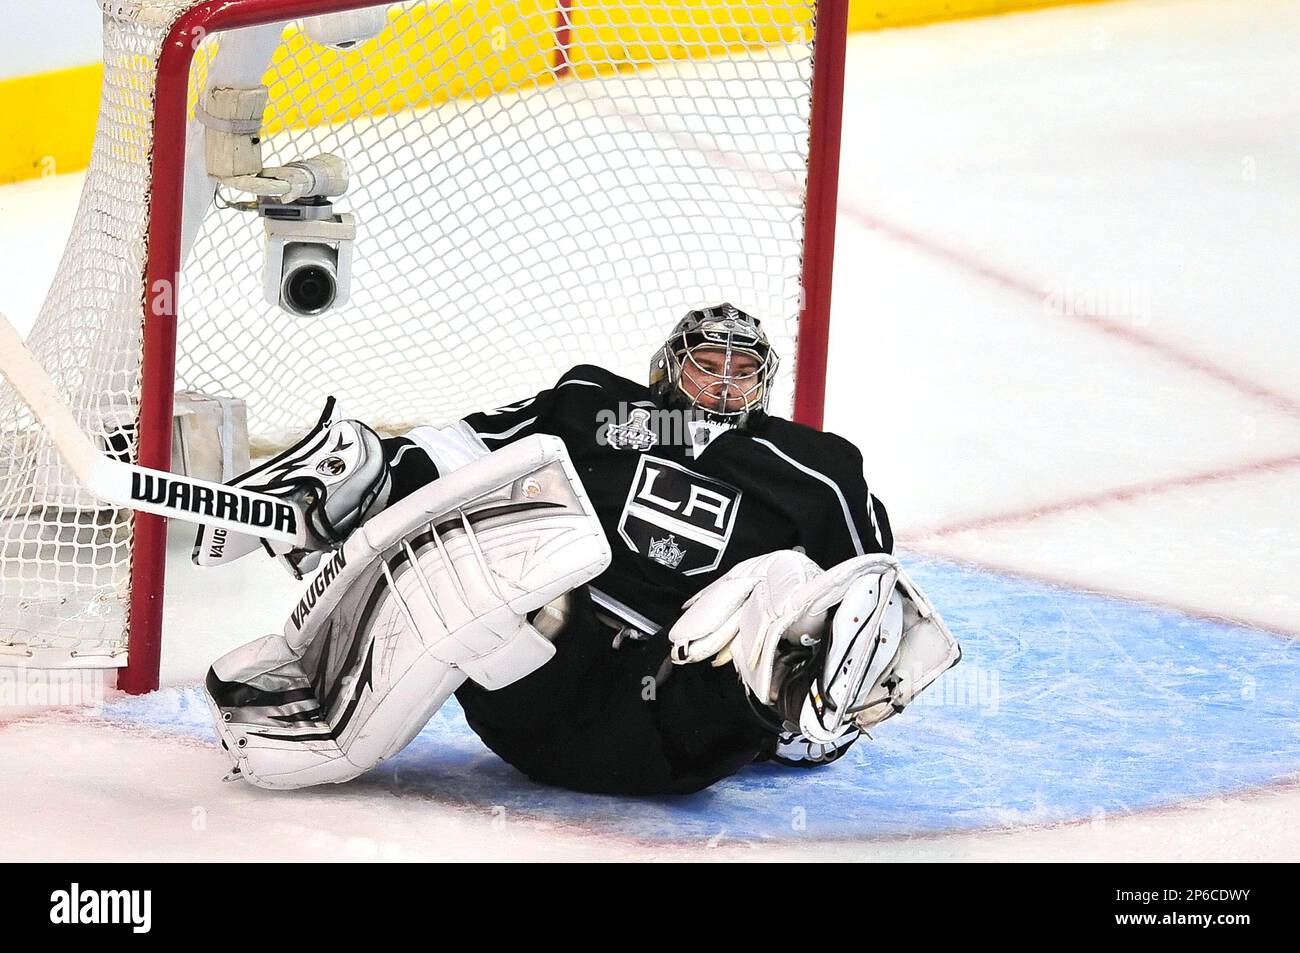 June 9, 2014 - Manhattan, New York, U.S - June 09 2014: Los Angeles Kings  goalie Jonathan Quick (32) comes out of the tunnel during game three of the  Stanley Cup Finals